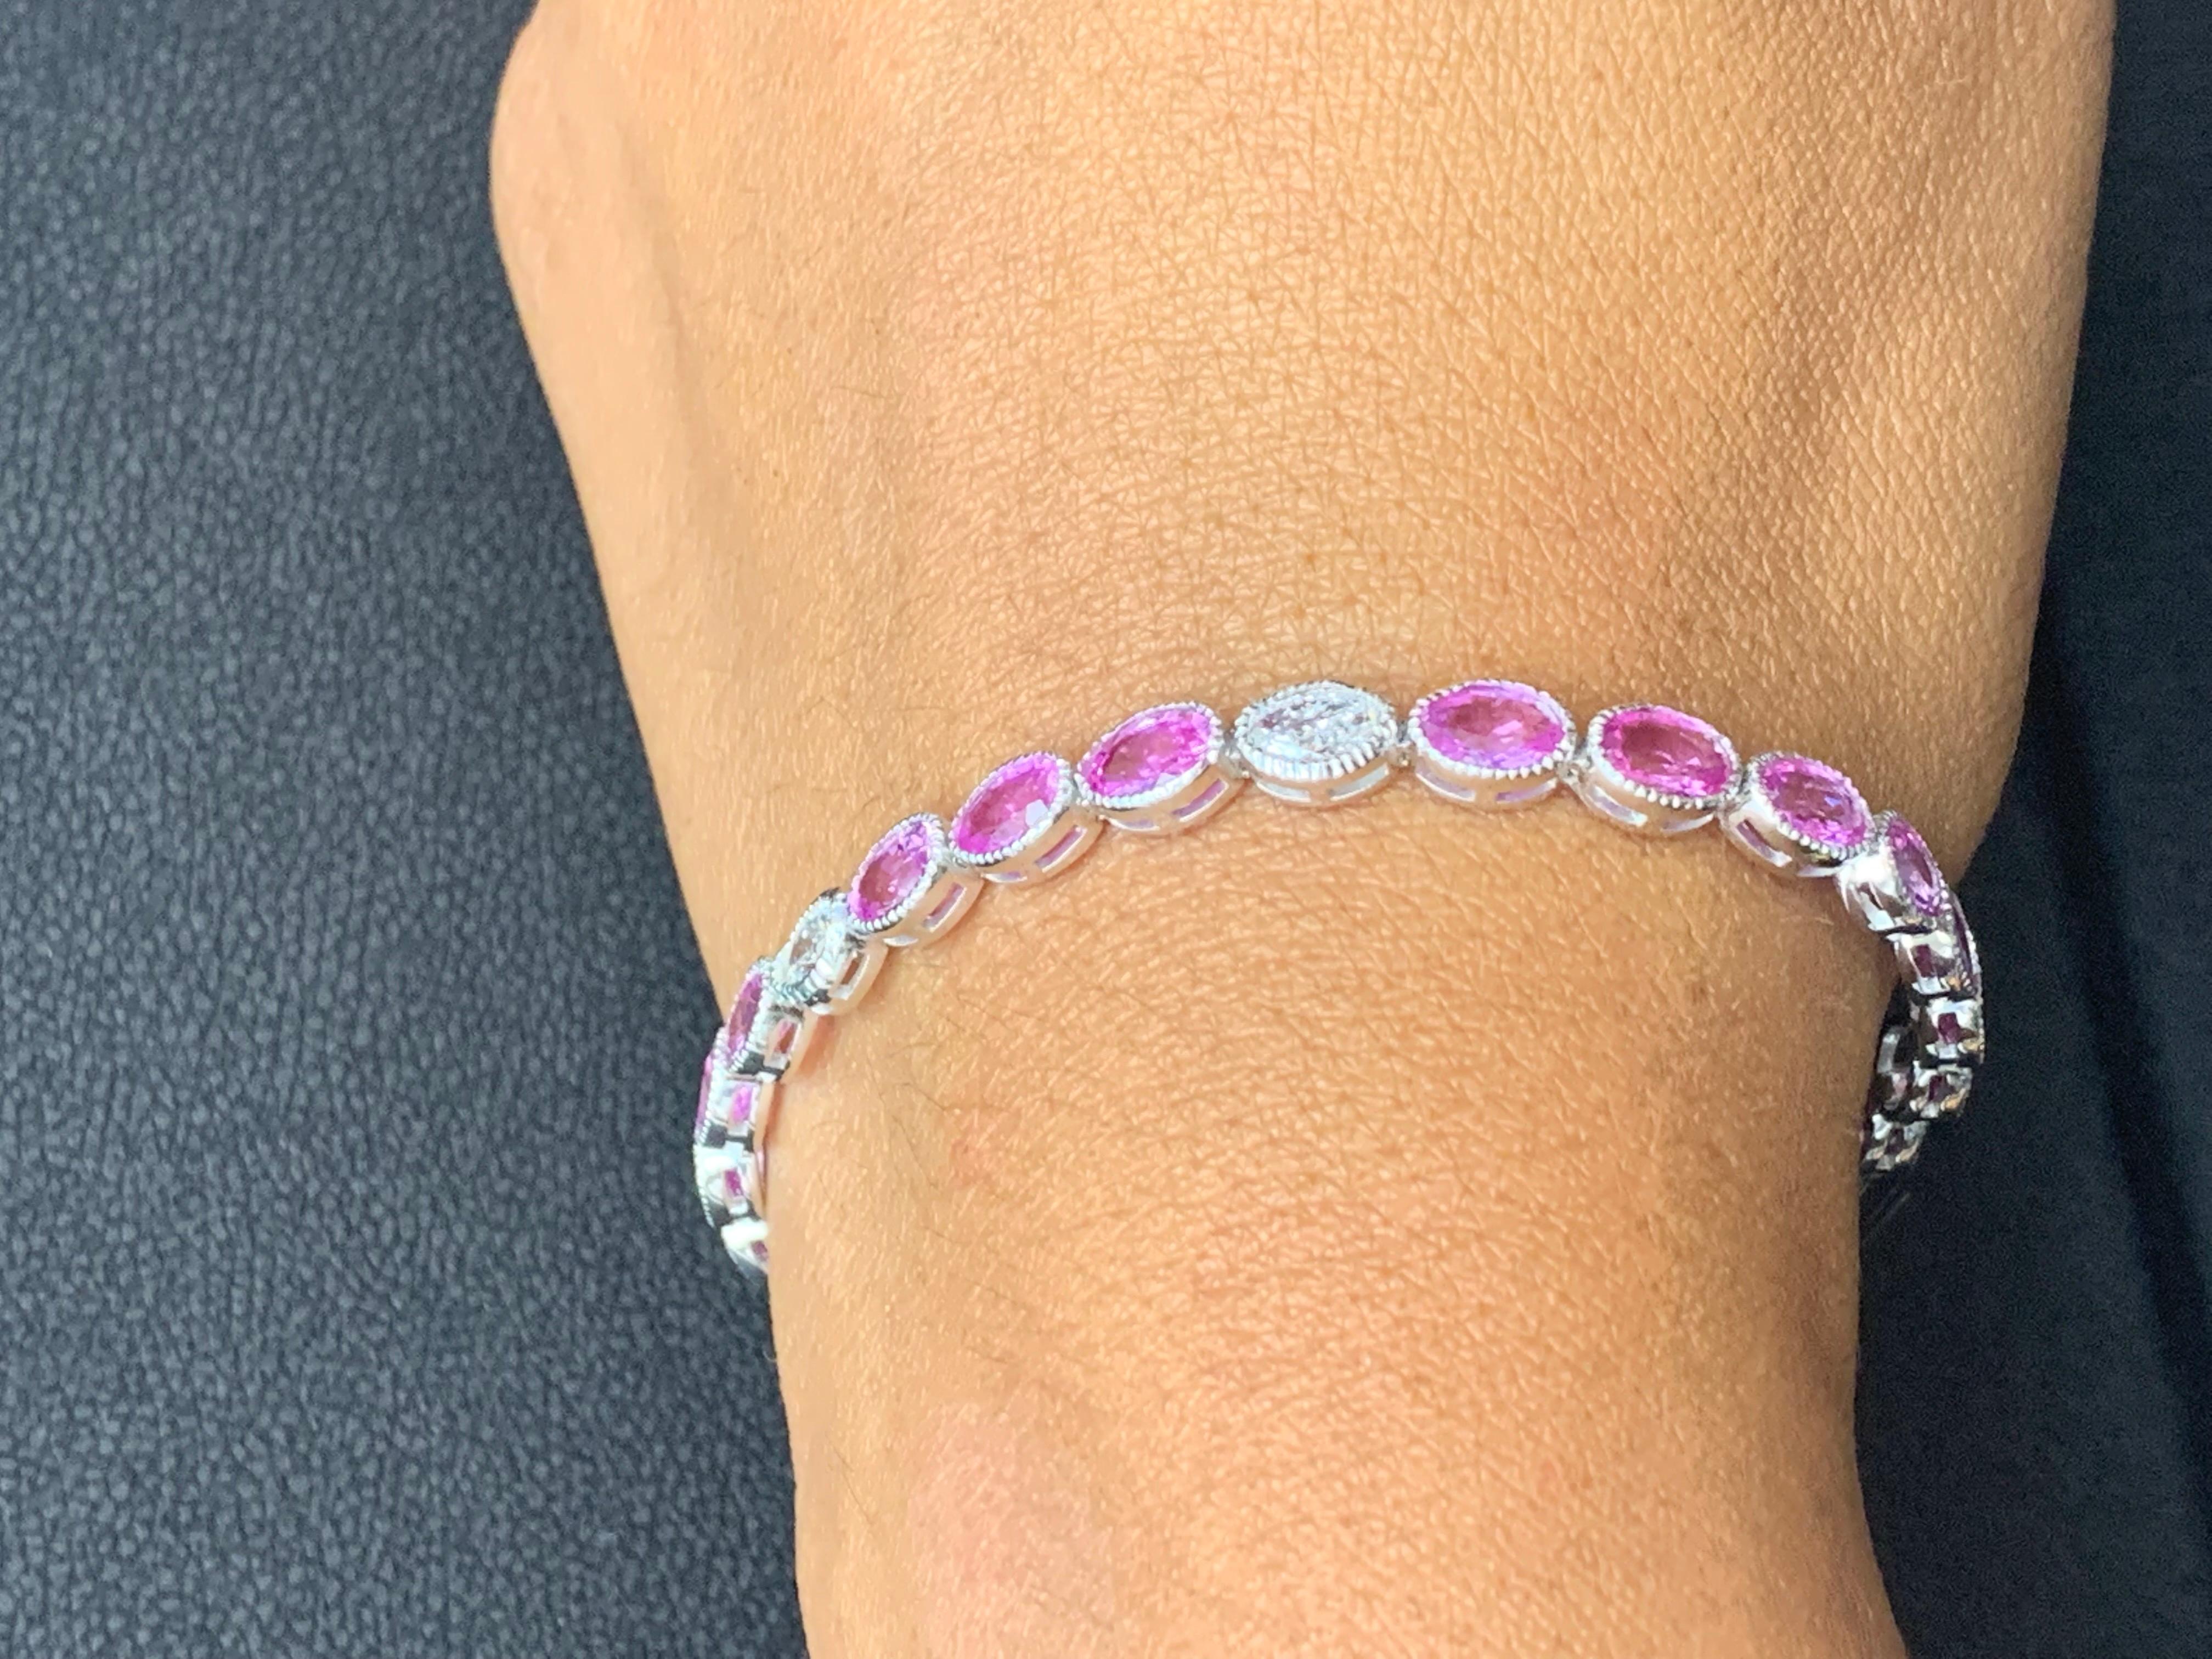 12.62 Carat Oval Cut Pink Sapphire and Diamond Tennis Bracelet in 14K White Gold For Sale 2